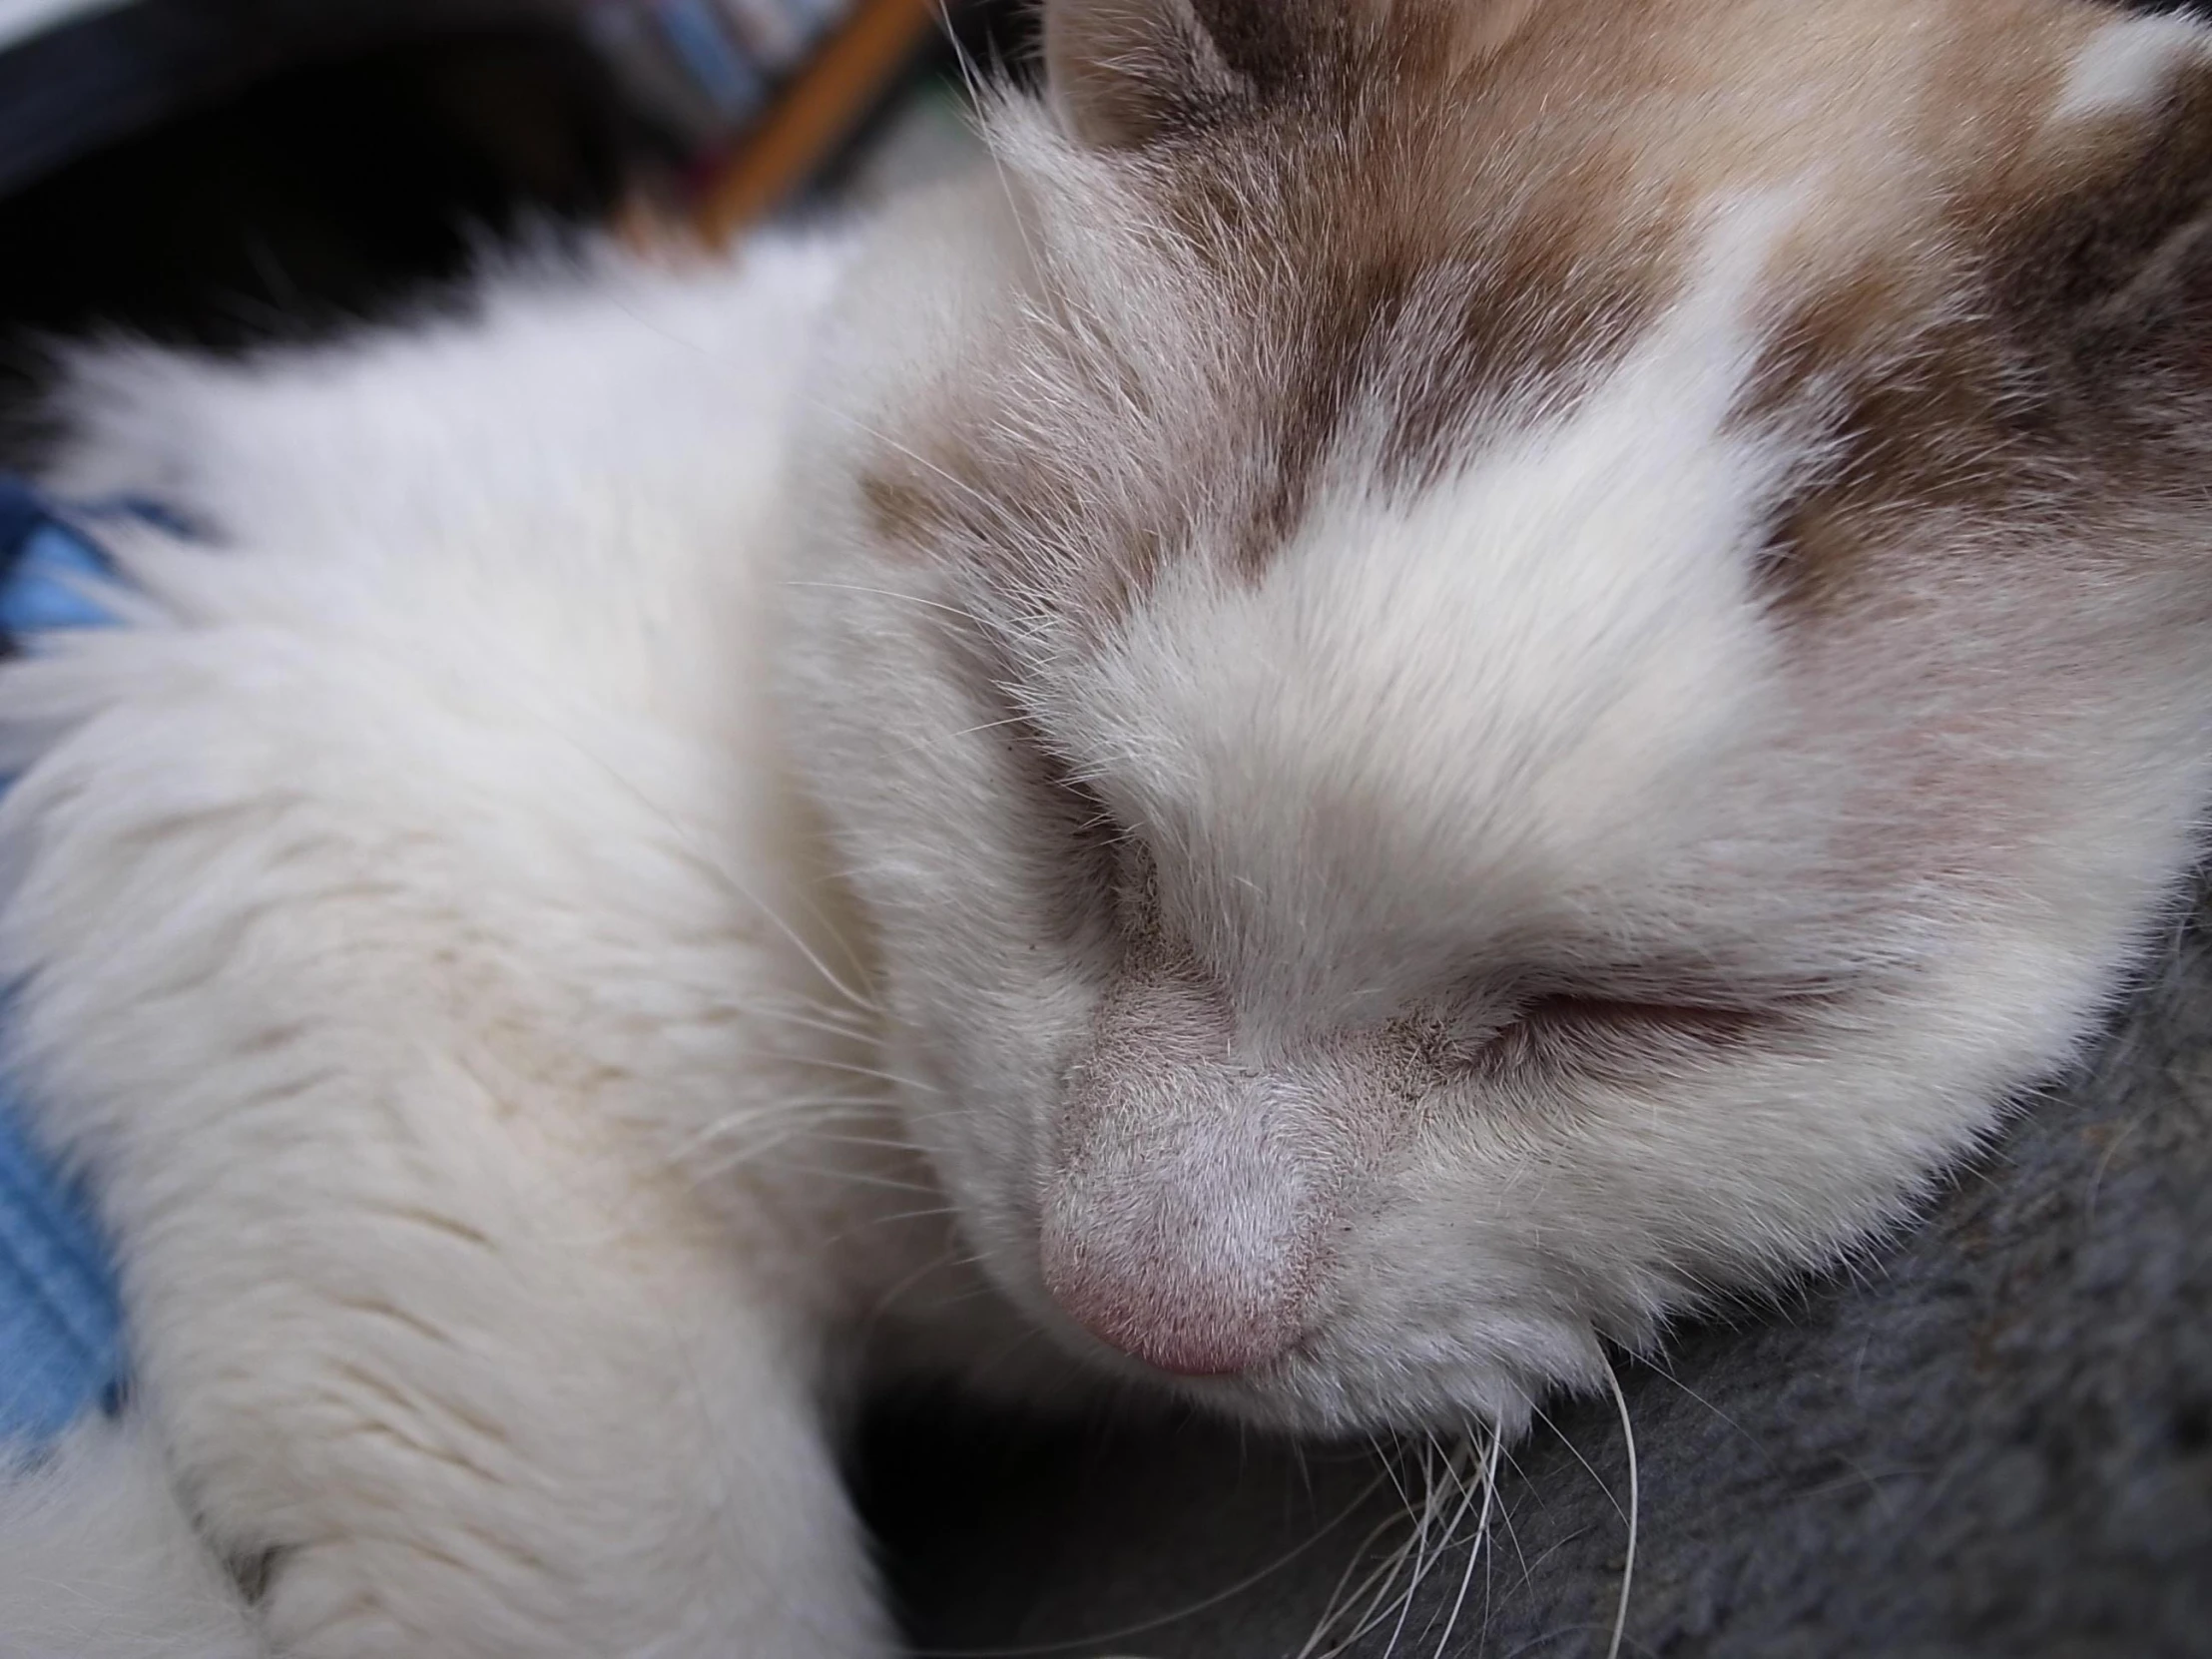 a close up s of a sleeping white and brown cat